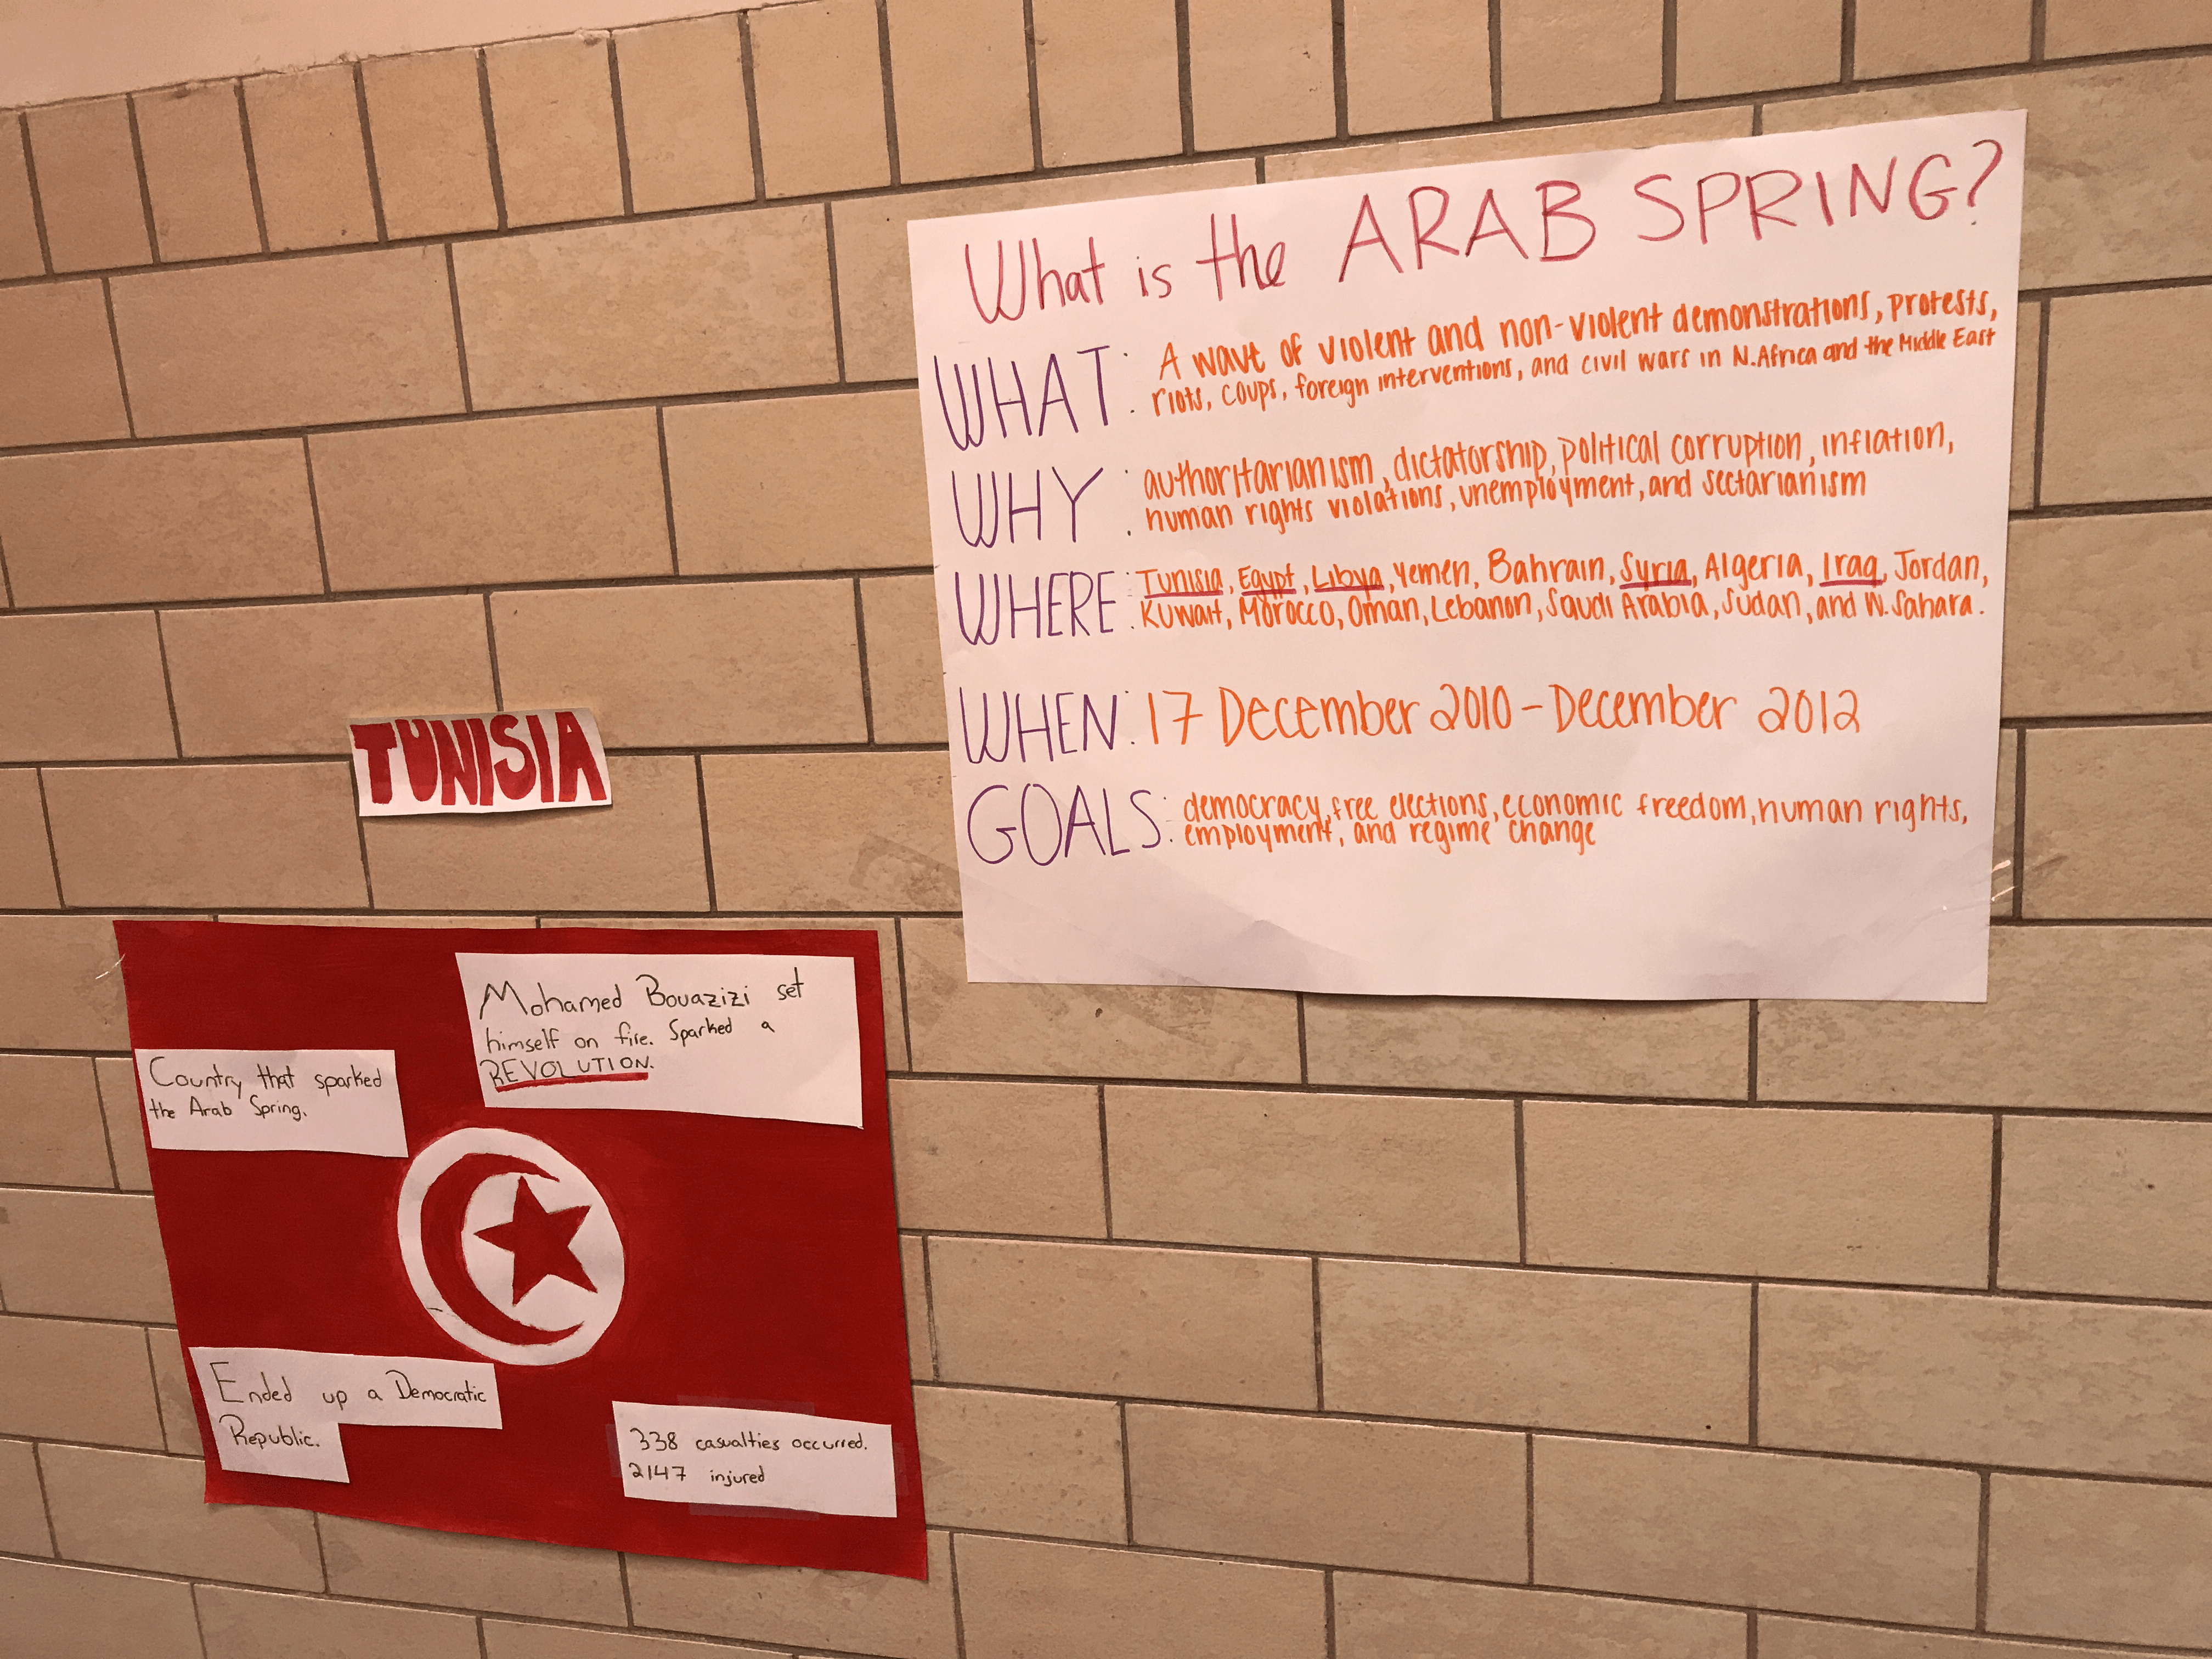 The hallways of the school housed a poster display on the countries affected by the Arab Spring. Image by Ken Hung. United States, 2018.